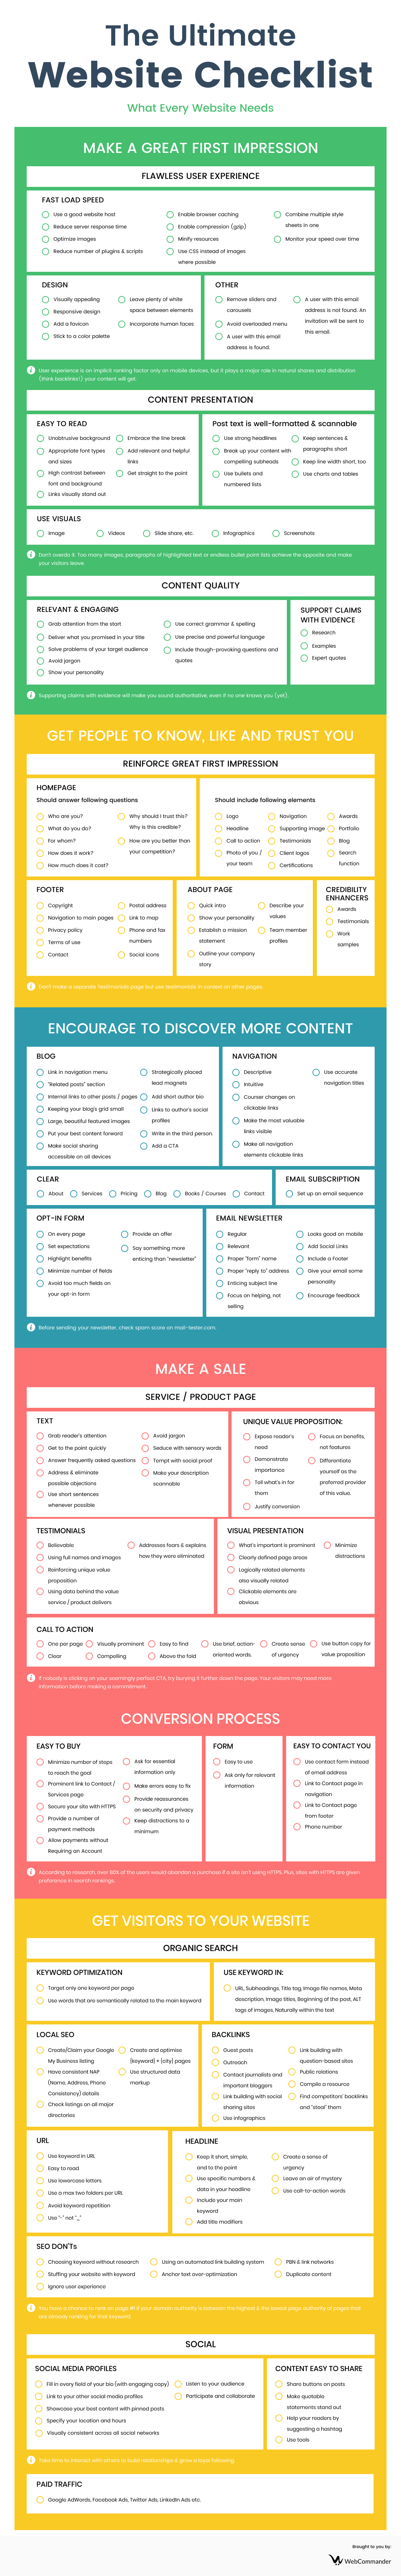 What Your Business Website Needs Now to Succeed - Infographic